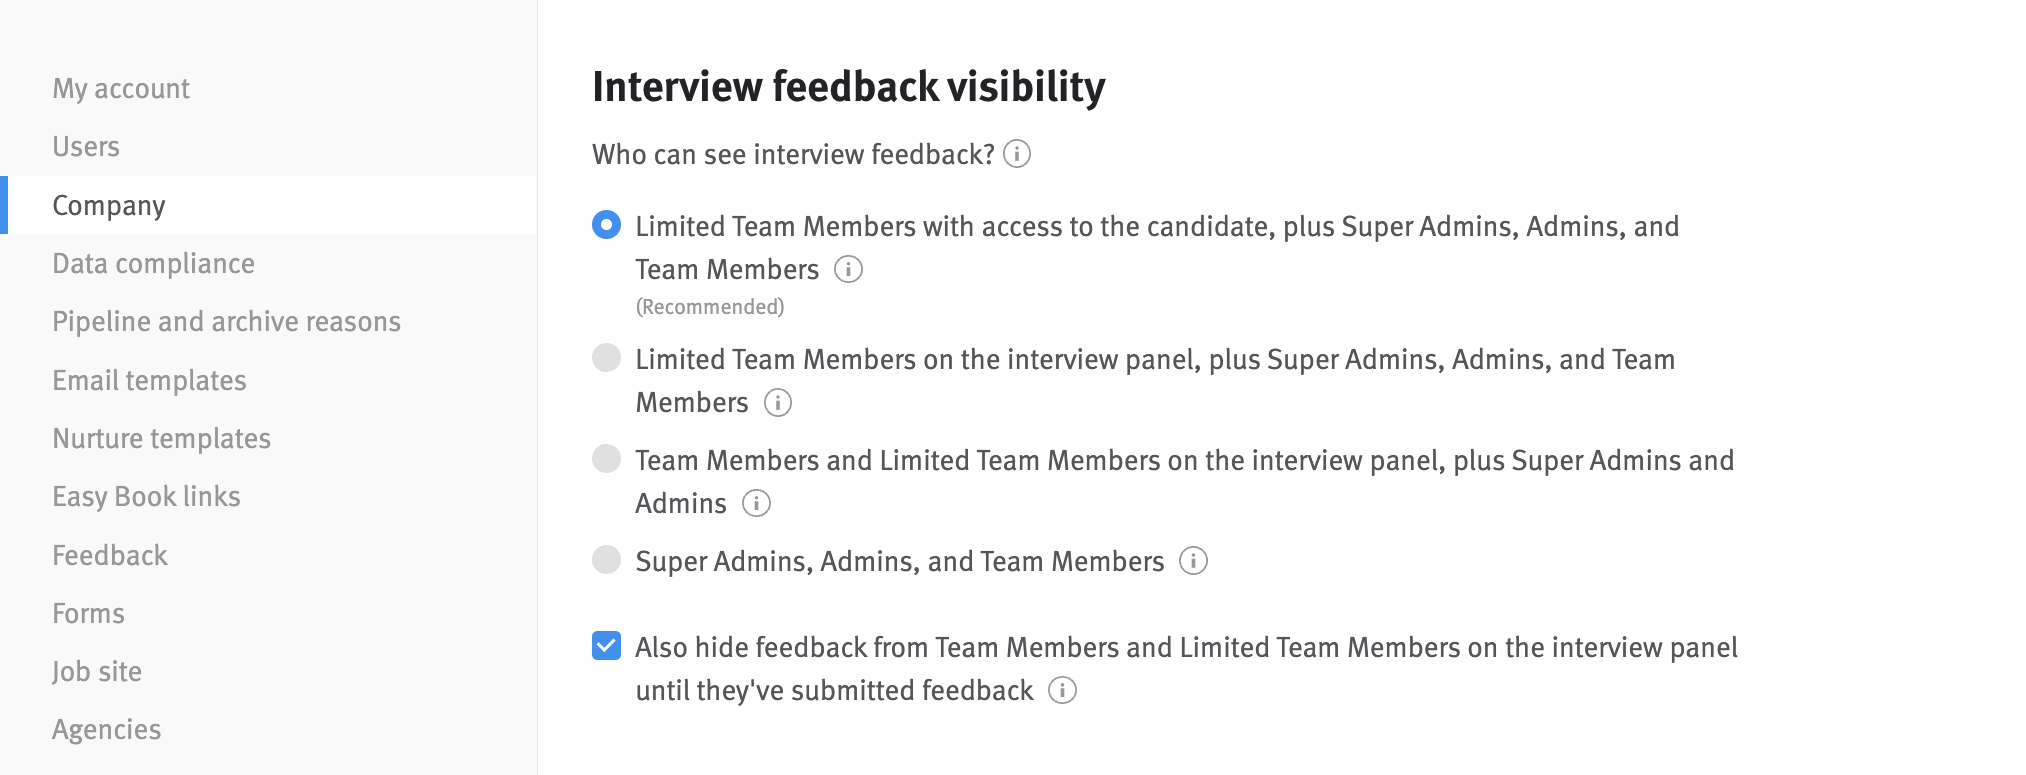 Interview feedback list options in settings